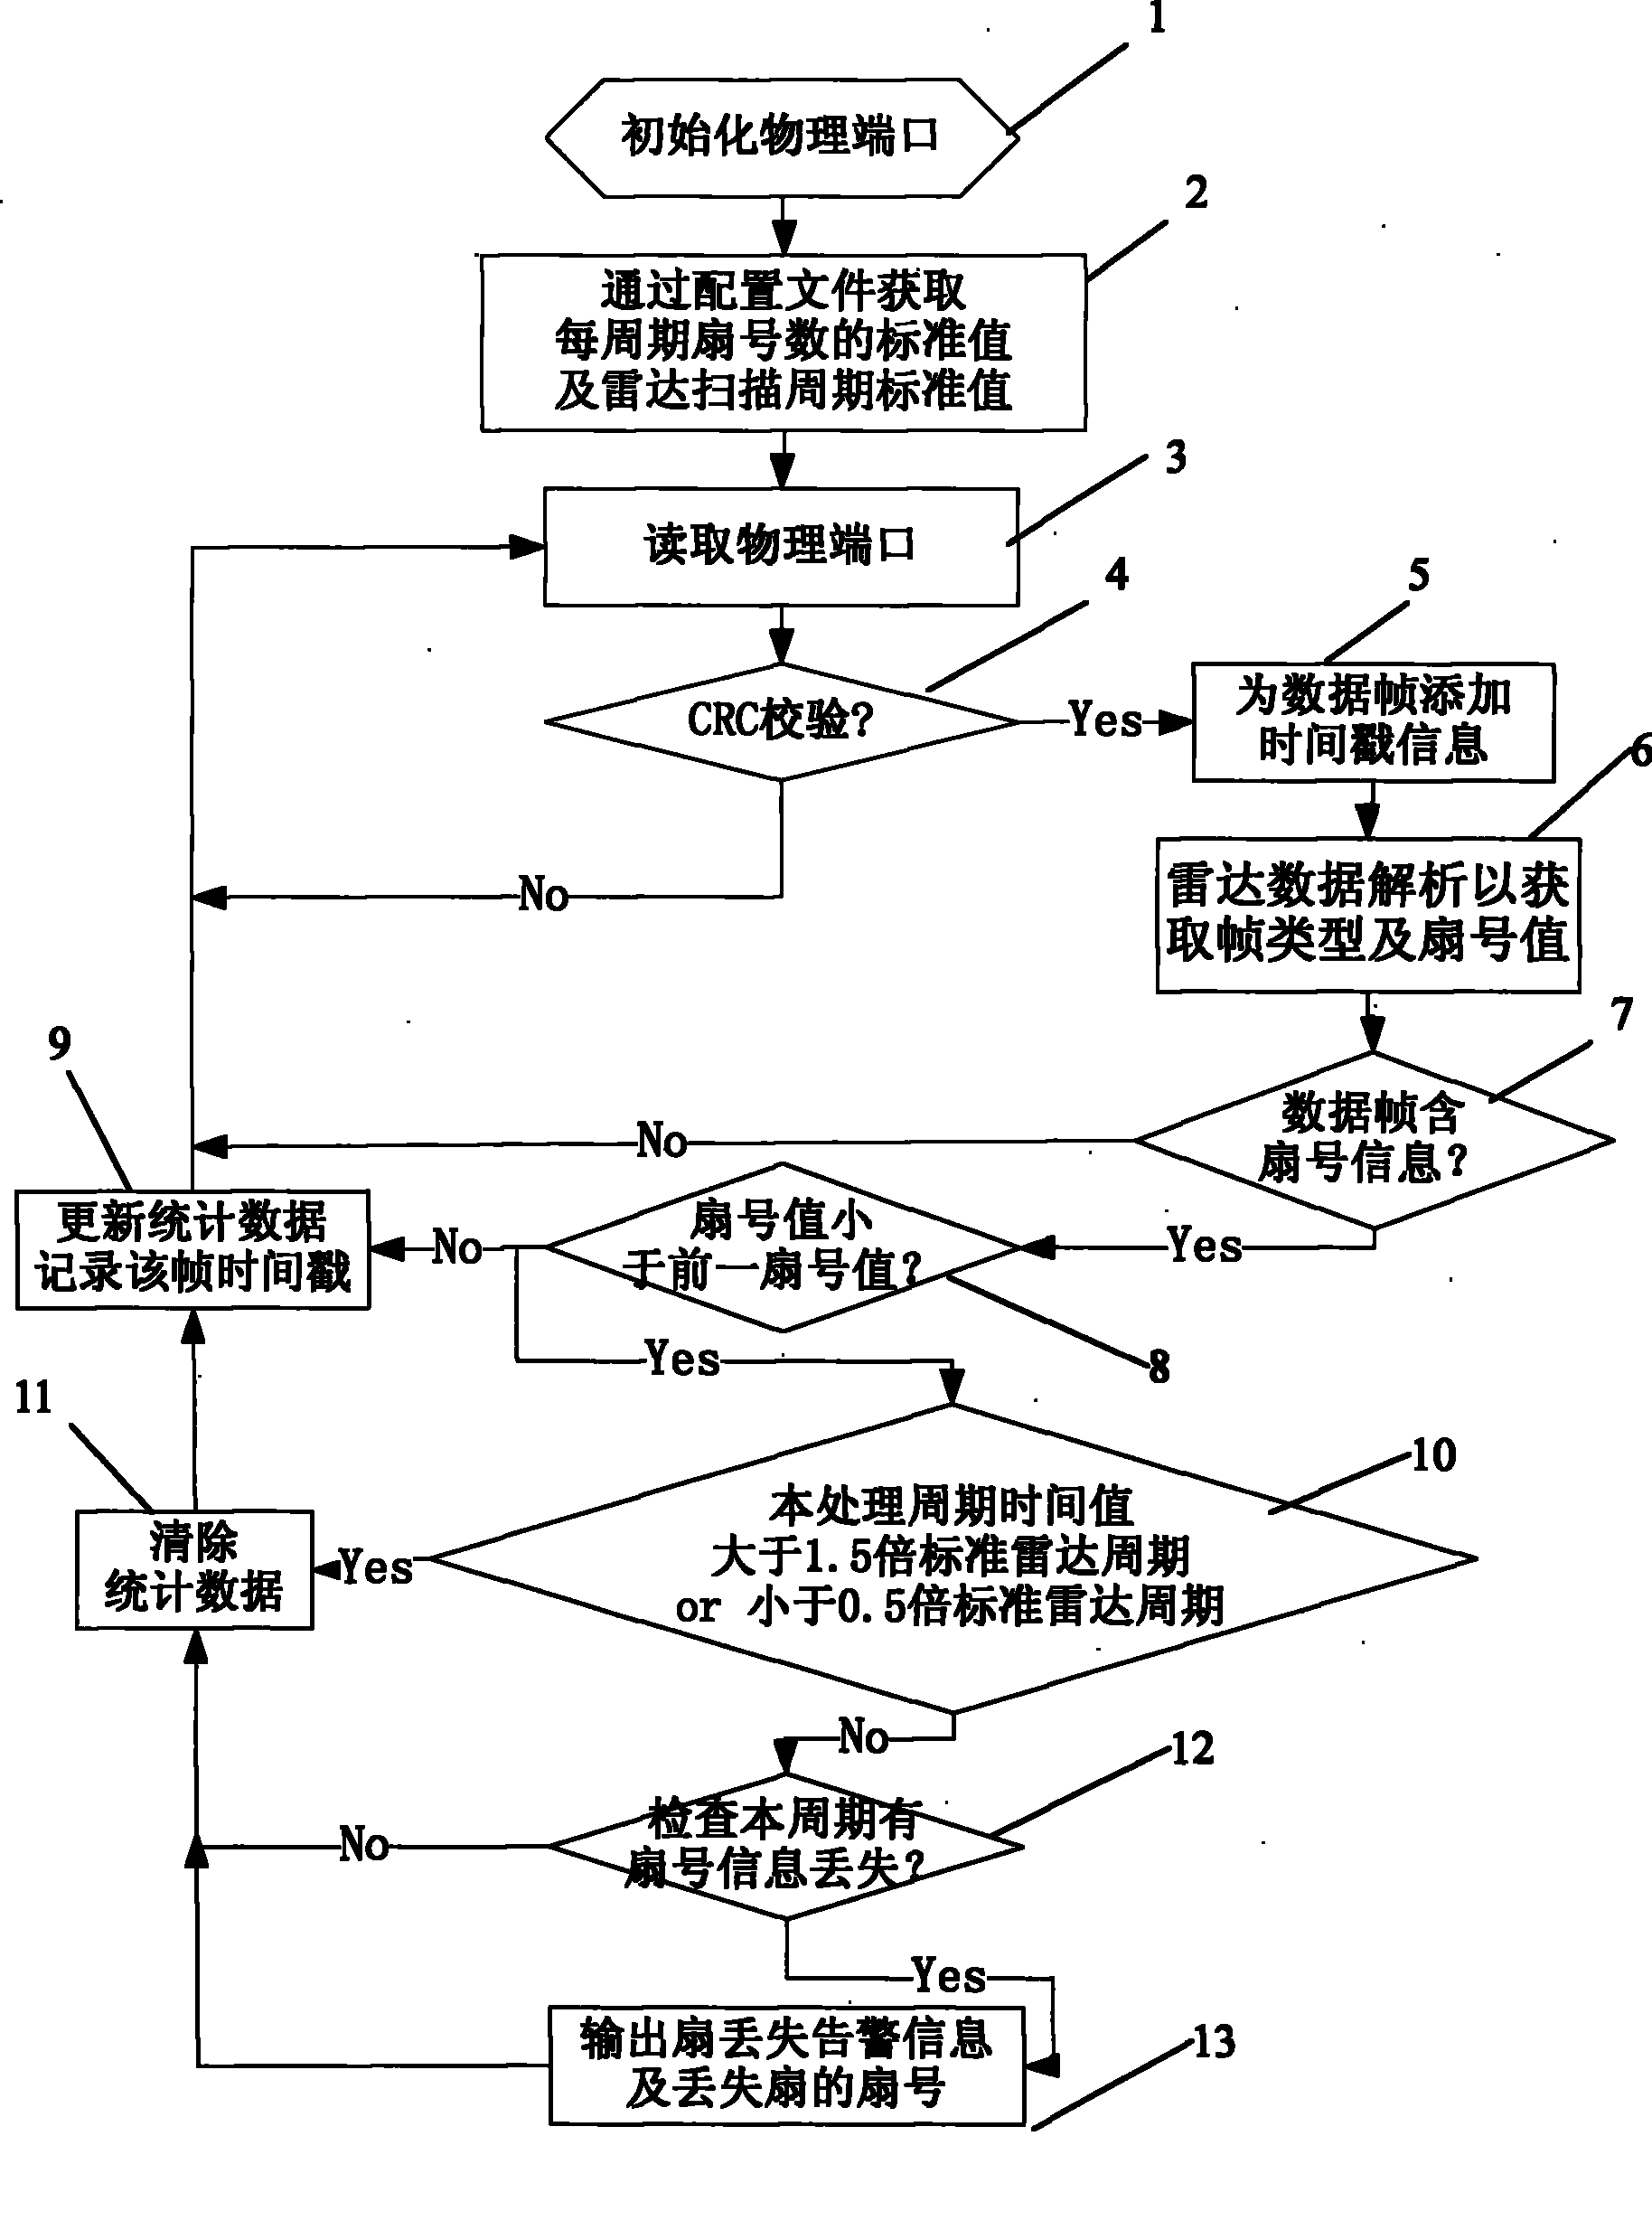 Radar data fan number accounting and monitoring method